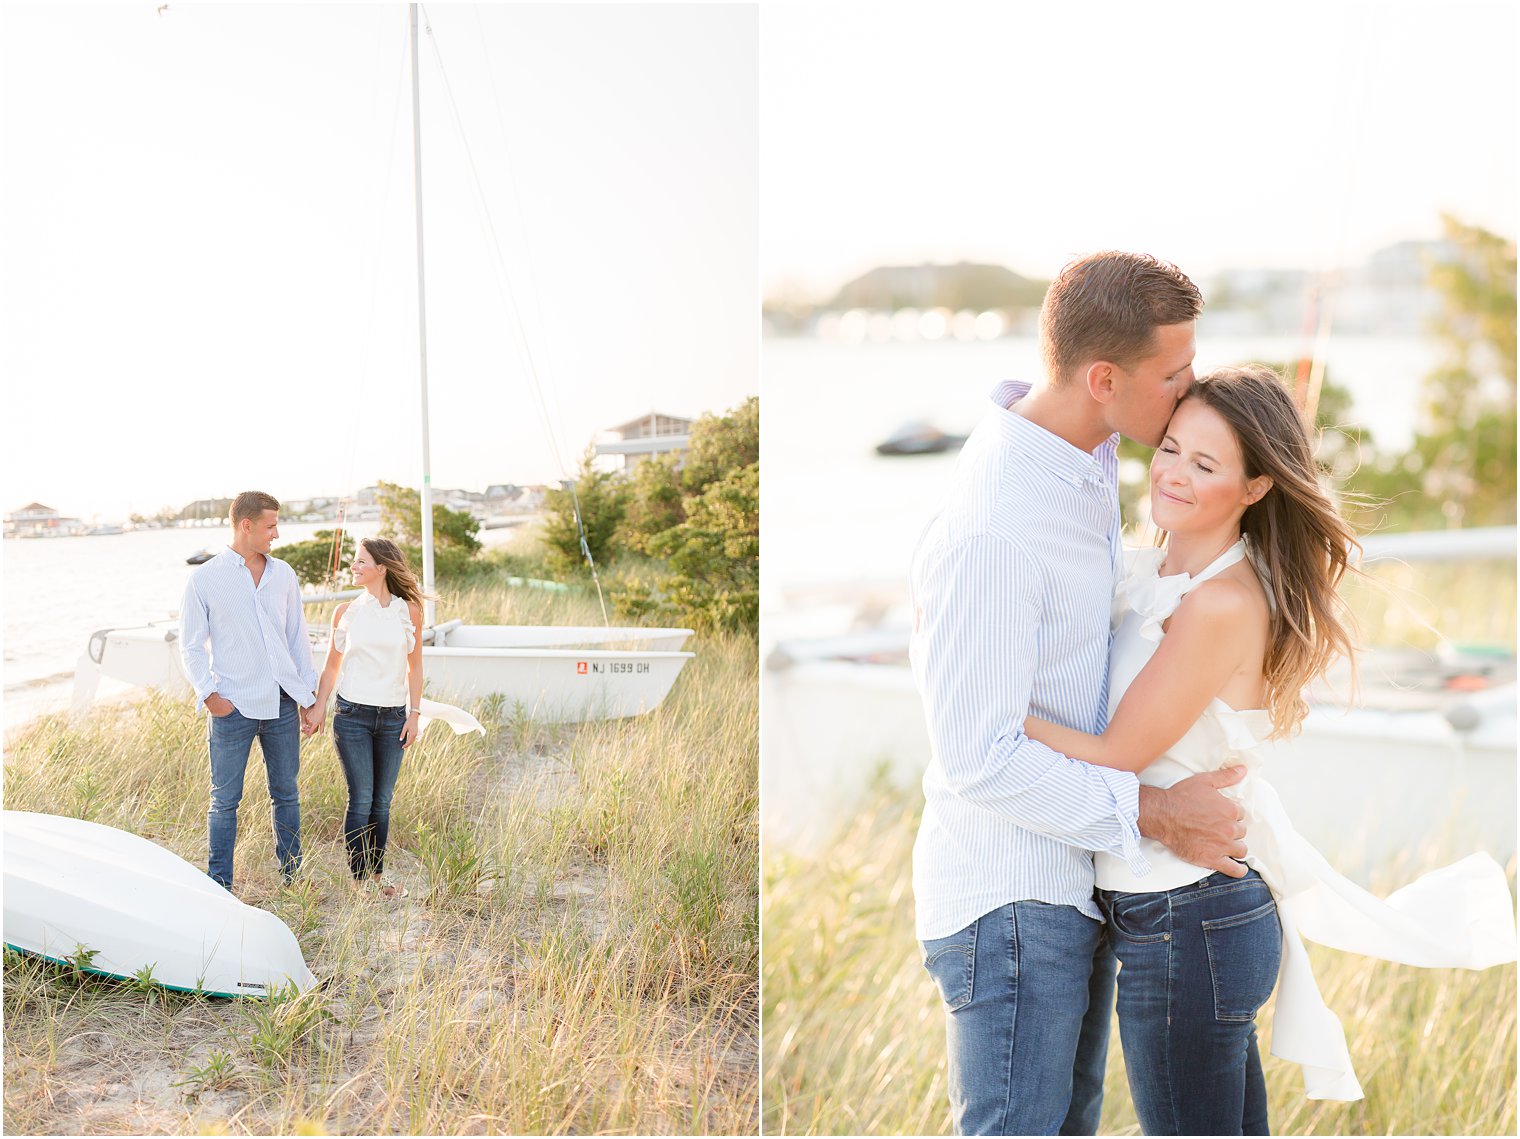 New Jersey beach engagement session with Idalia Photography